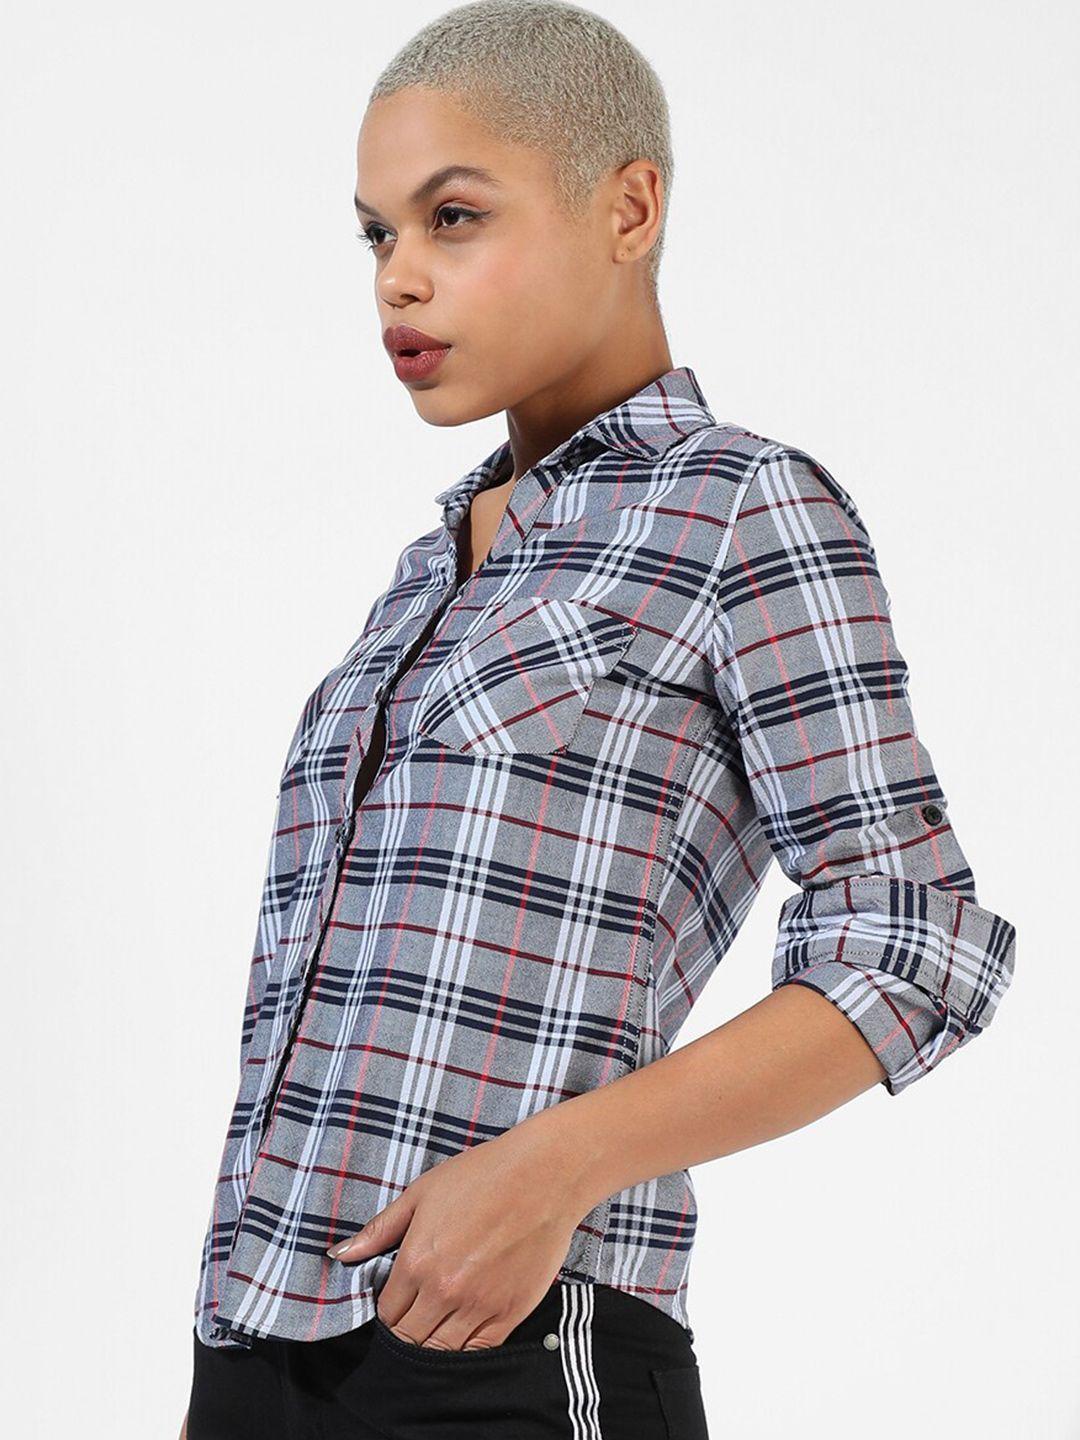 Campus Sutra Tartan Checked Spread Collar Roll-Up Sleeves Classic Cotton Casual Shirt